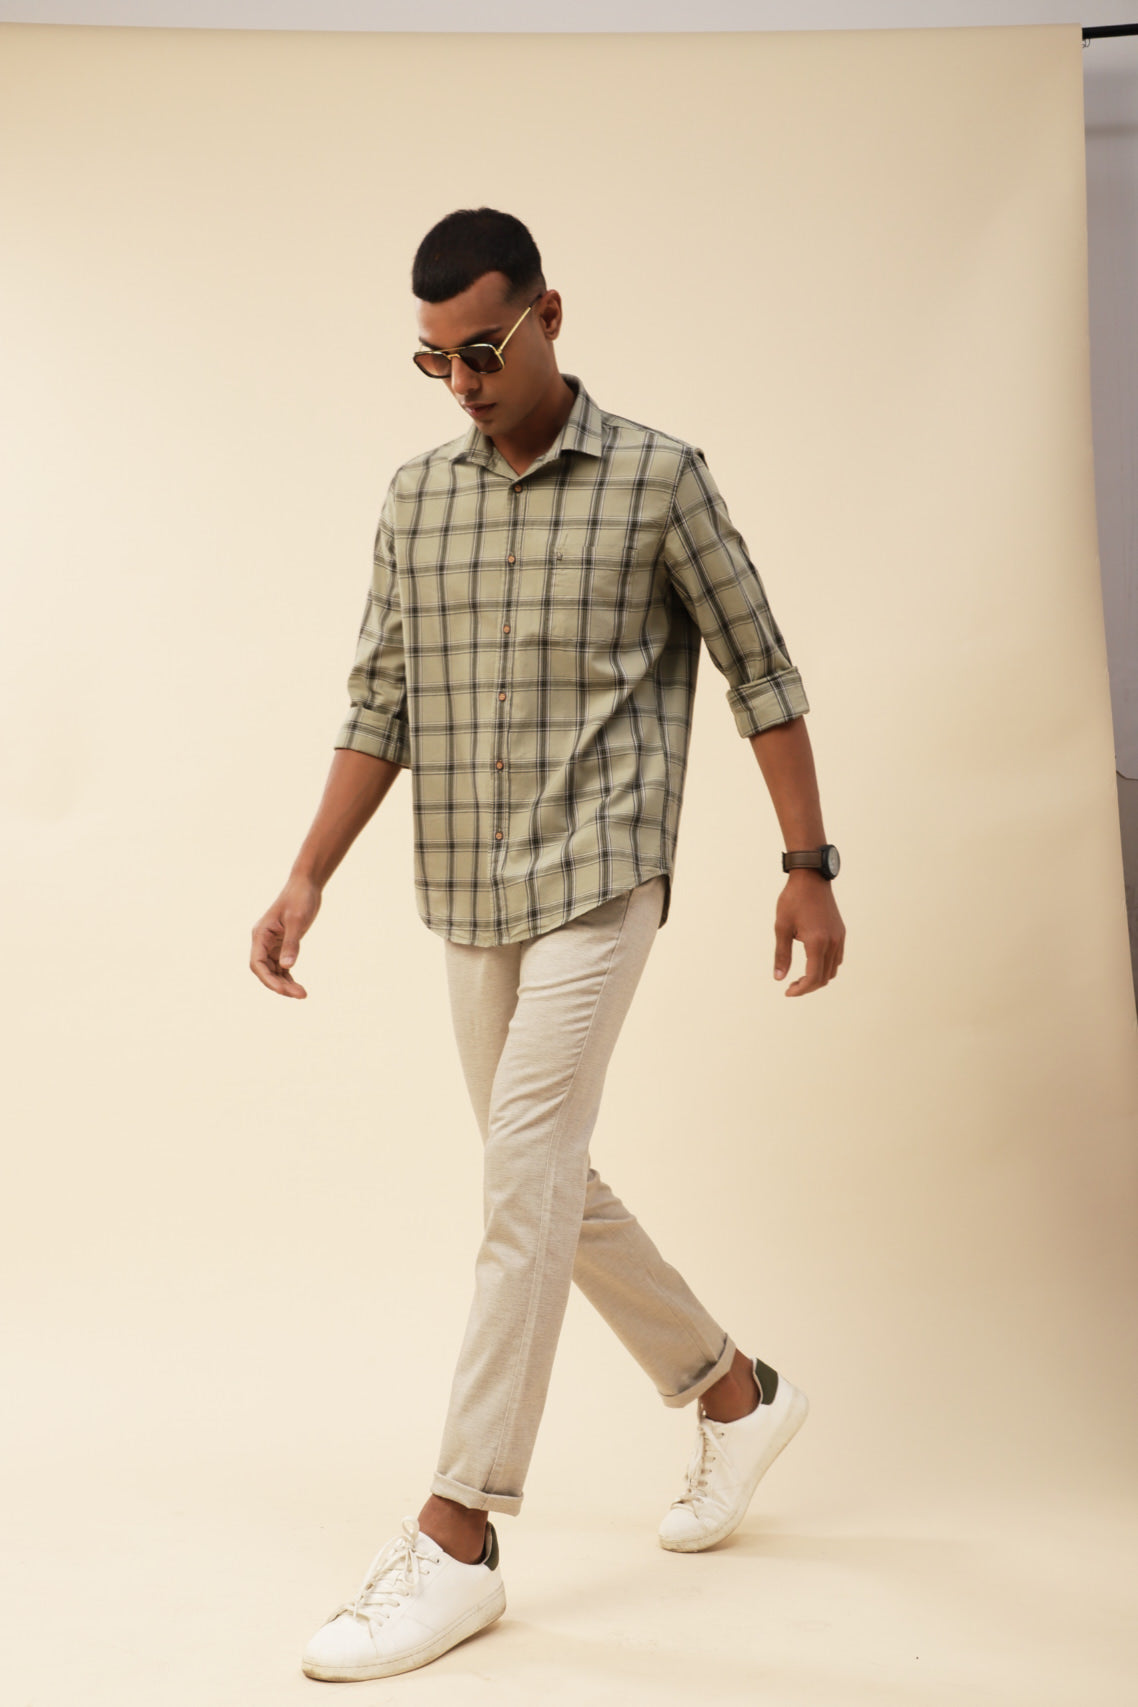 100% Cotton Green Checkered Slim Fit Full Sleeve Casual Shirt